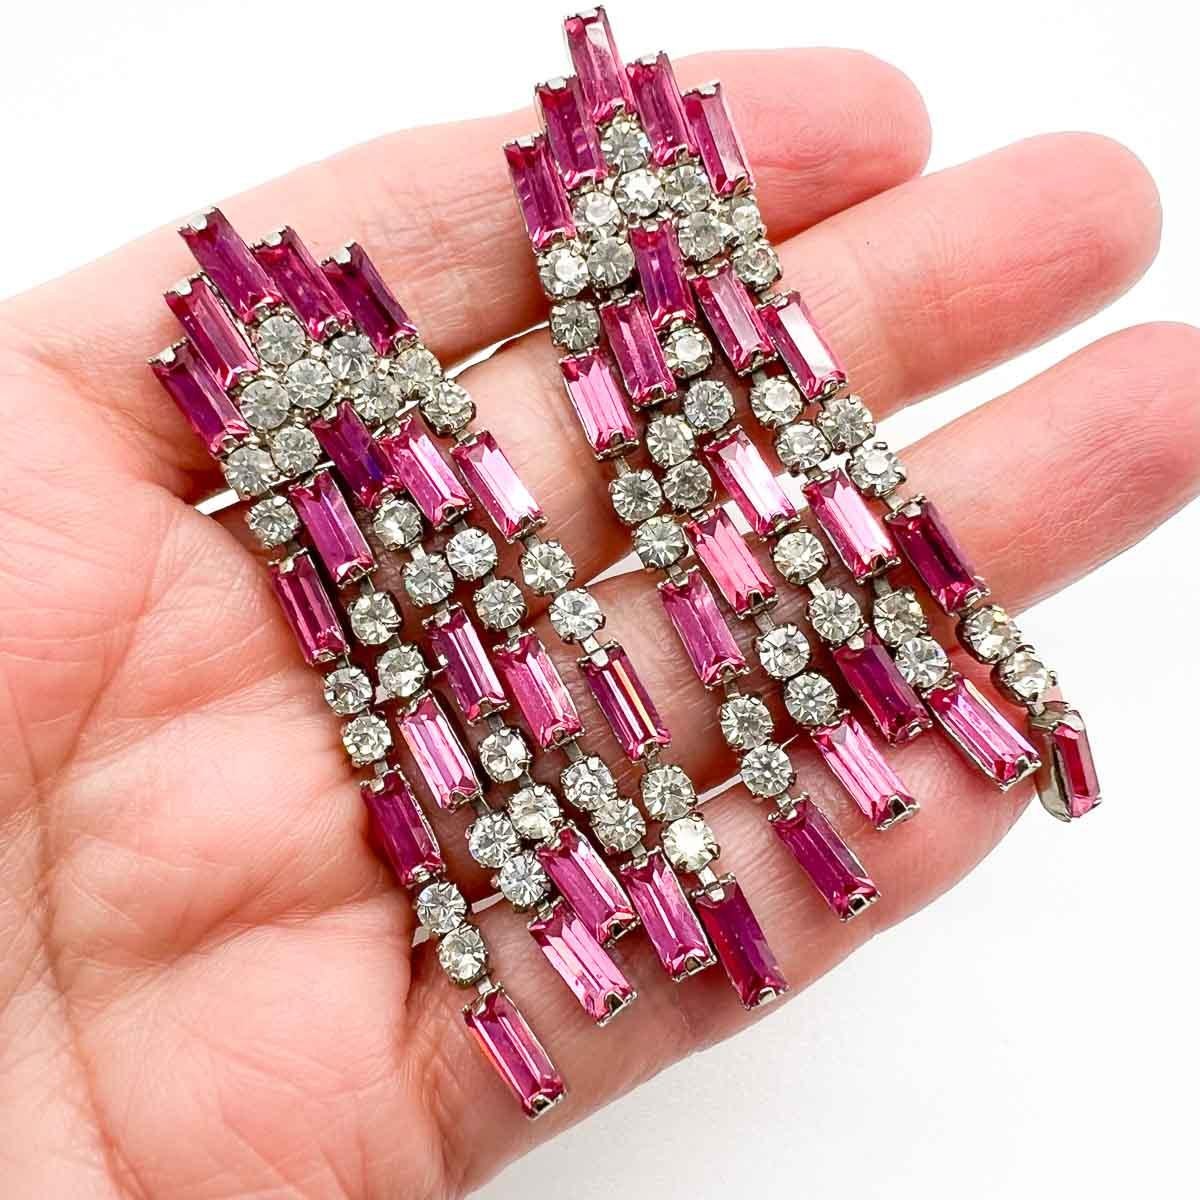 Delightful Vintage Pink Baguette Earrings. Cascades of pink and white baguette cut crystal stones create the perfect art deco style statement.
An unsigned beauty. A rare treasure. Just because a jewel doesn’t carry a designer name, doesn’t mean it